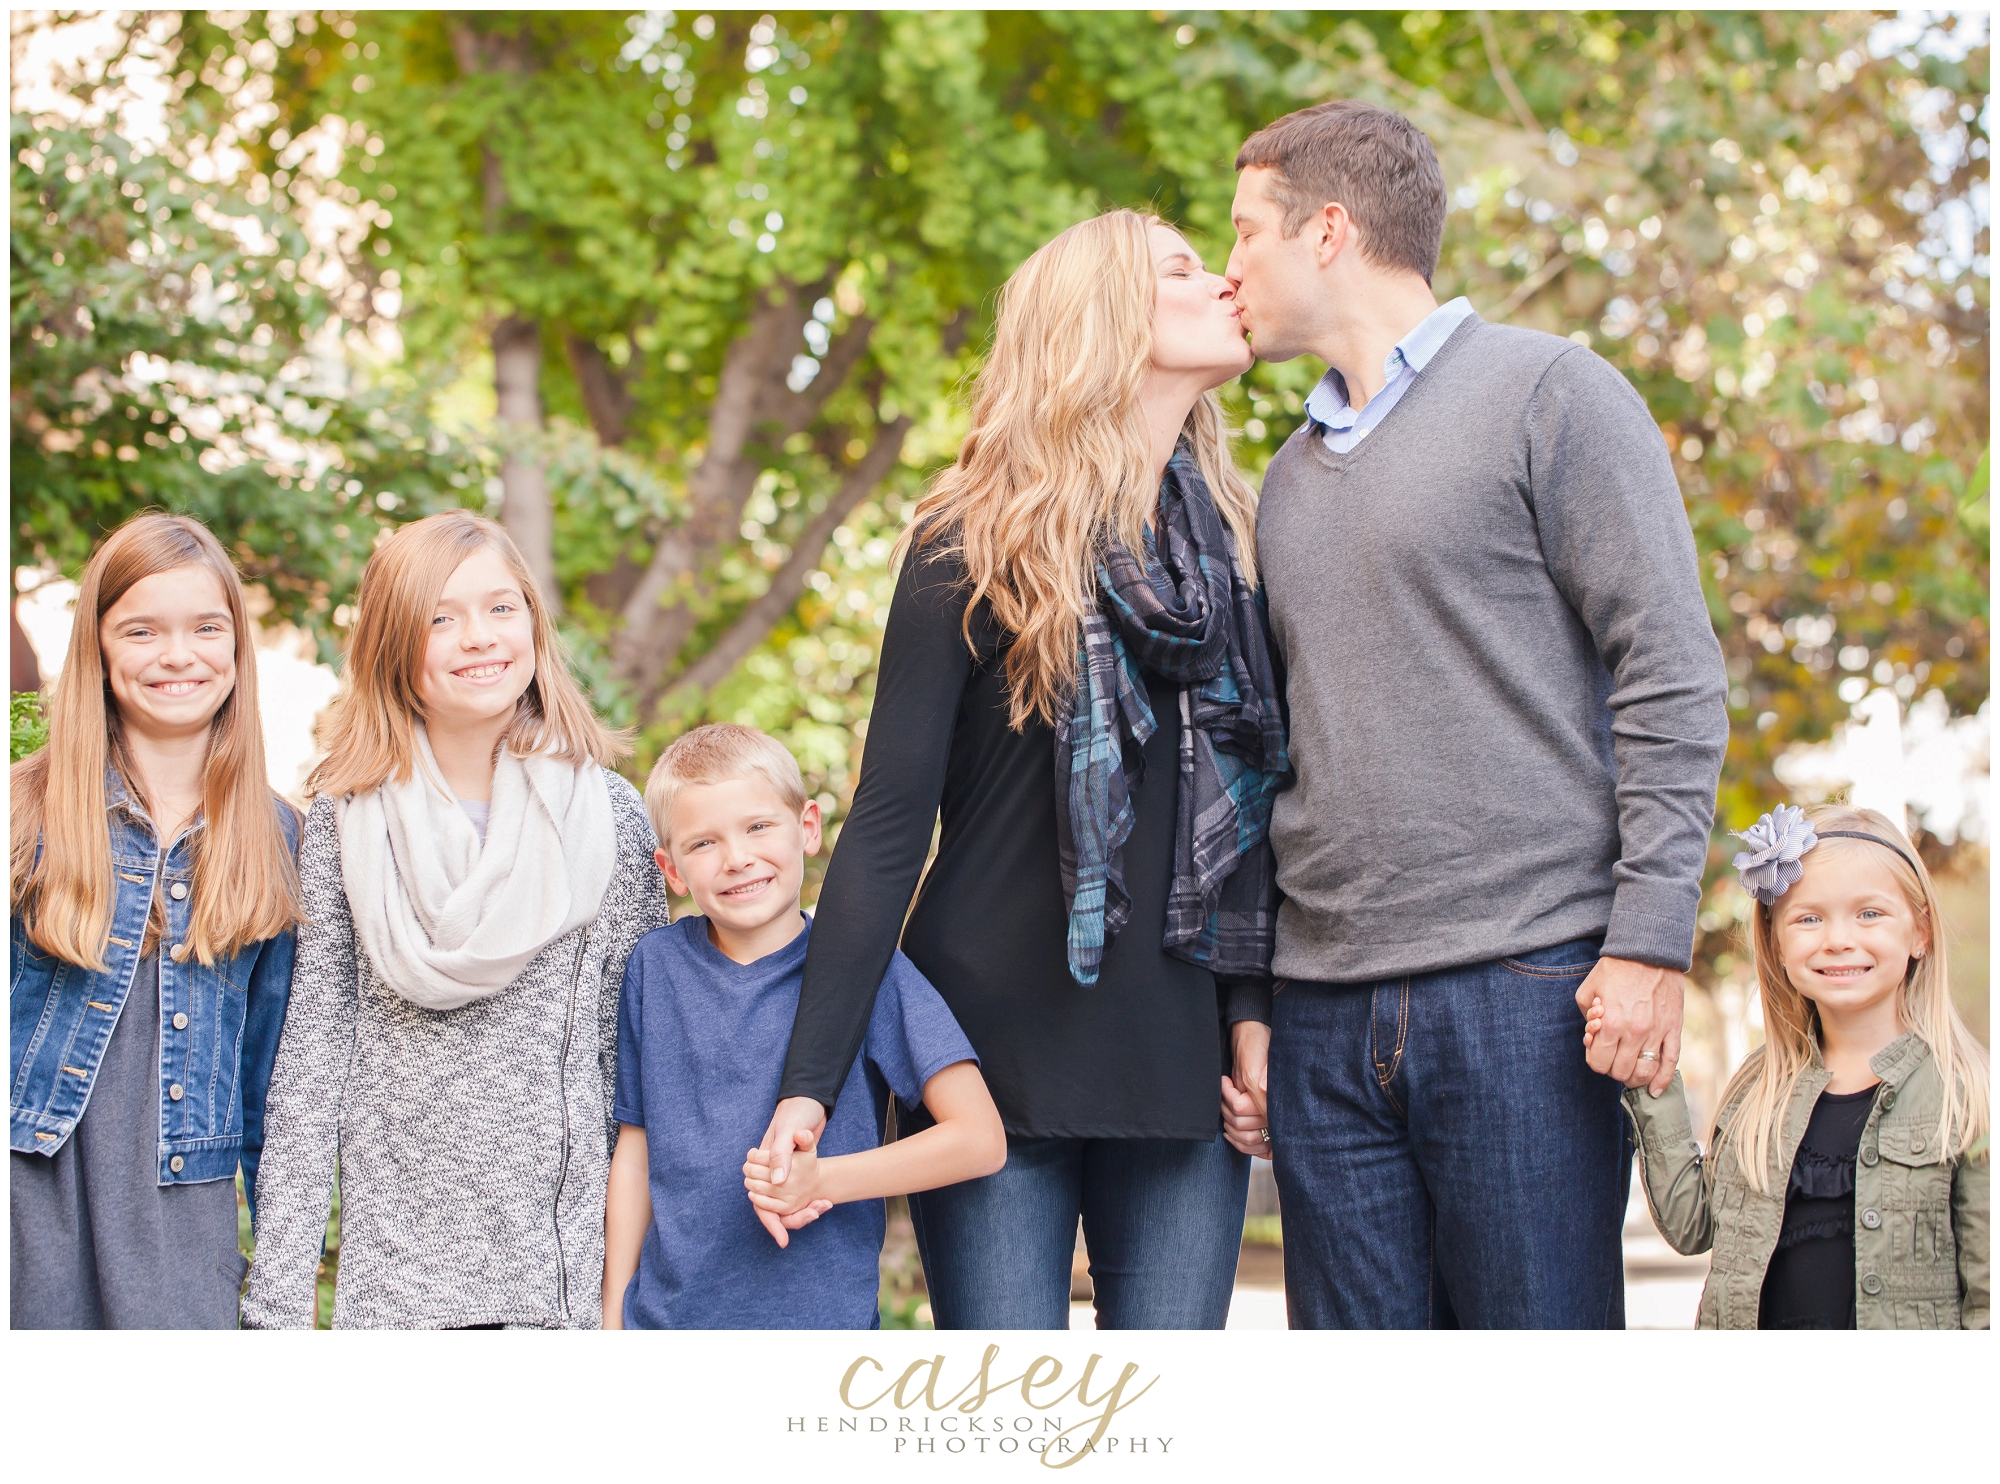 View More: http://caseyhphotos.pass.us/hillfamily2014